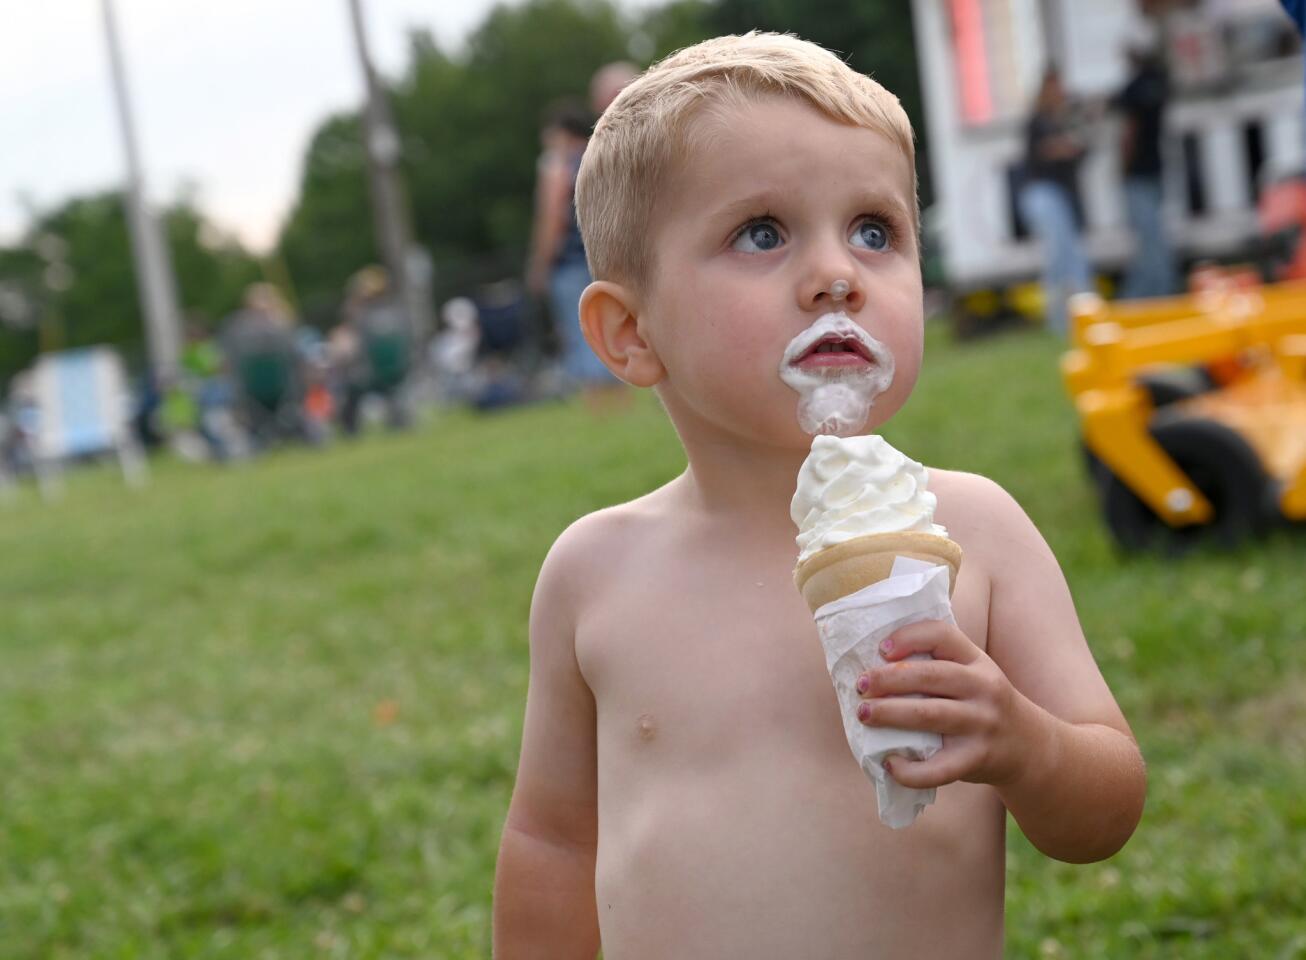 Brooks Turner, 2, of Mount Airy indulges in a soft serve ice cream at the Mount Airy Volunteer Fire Company's annual carnival on Tuesday, July 23.